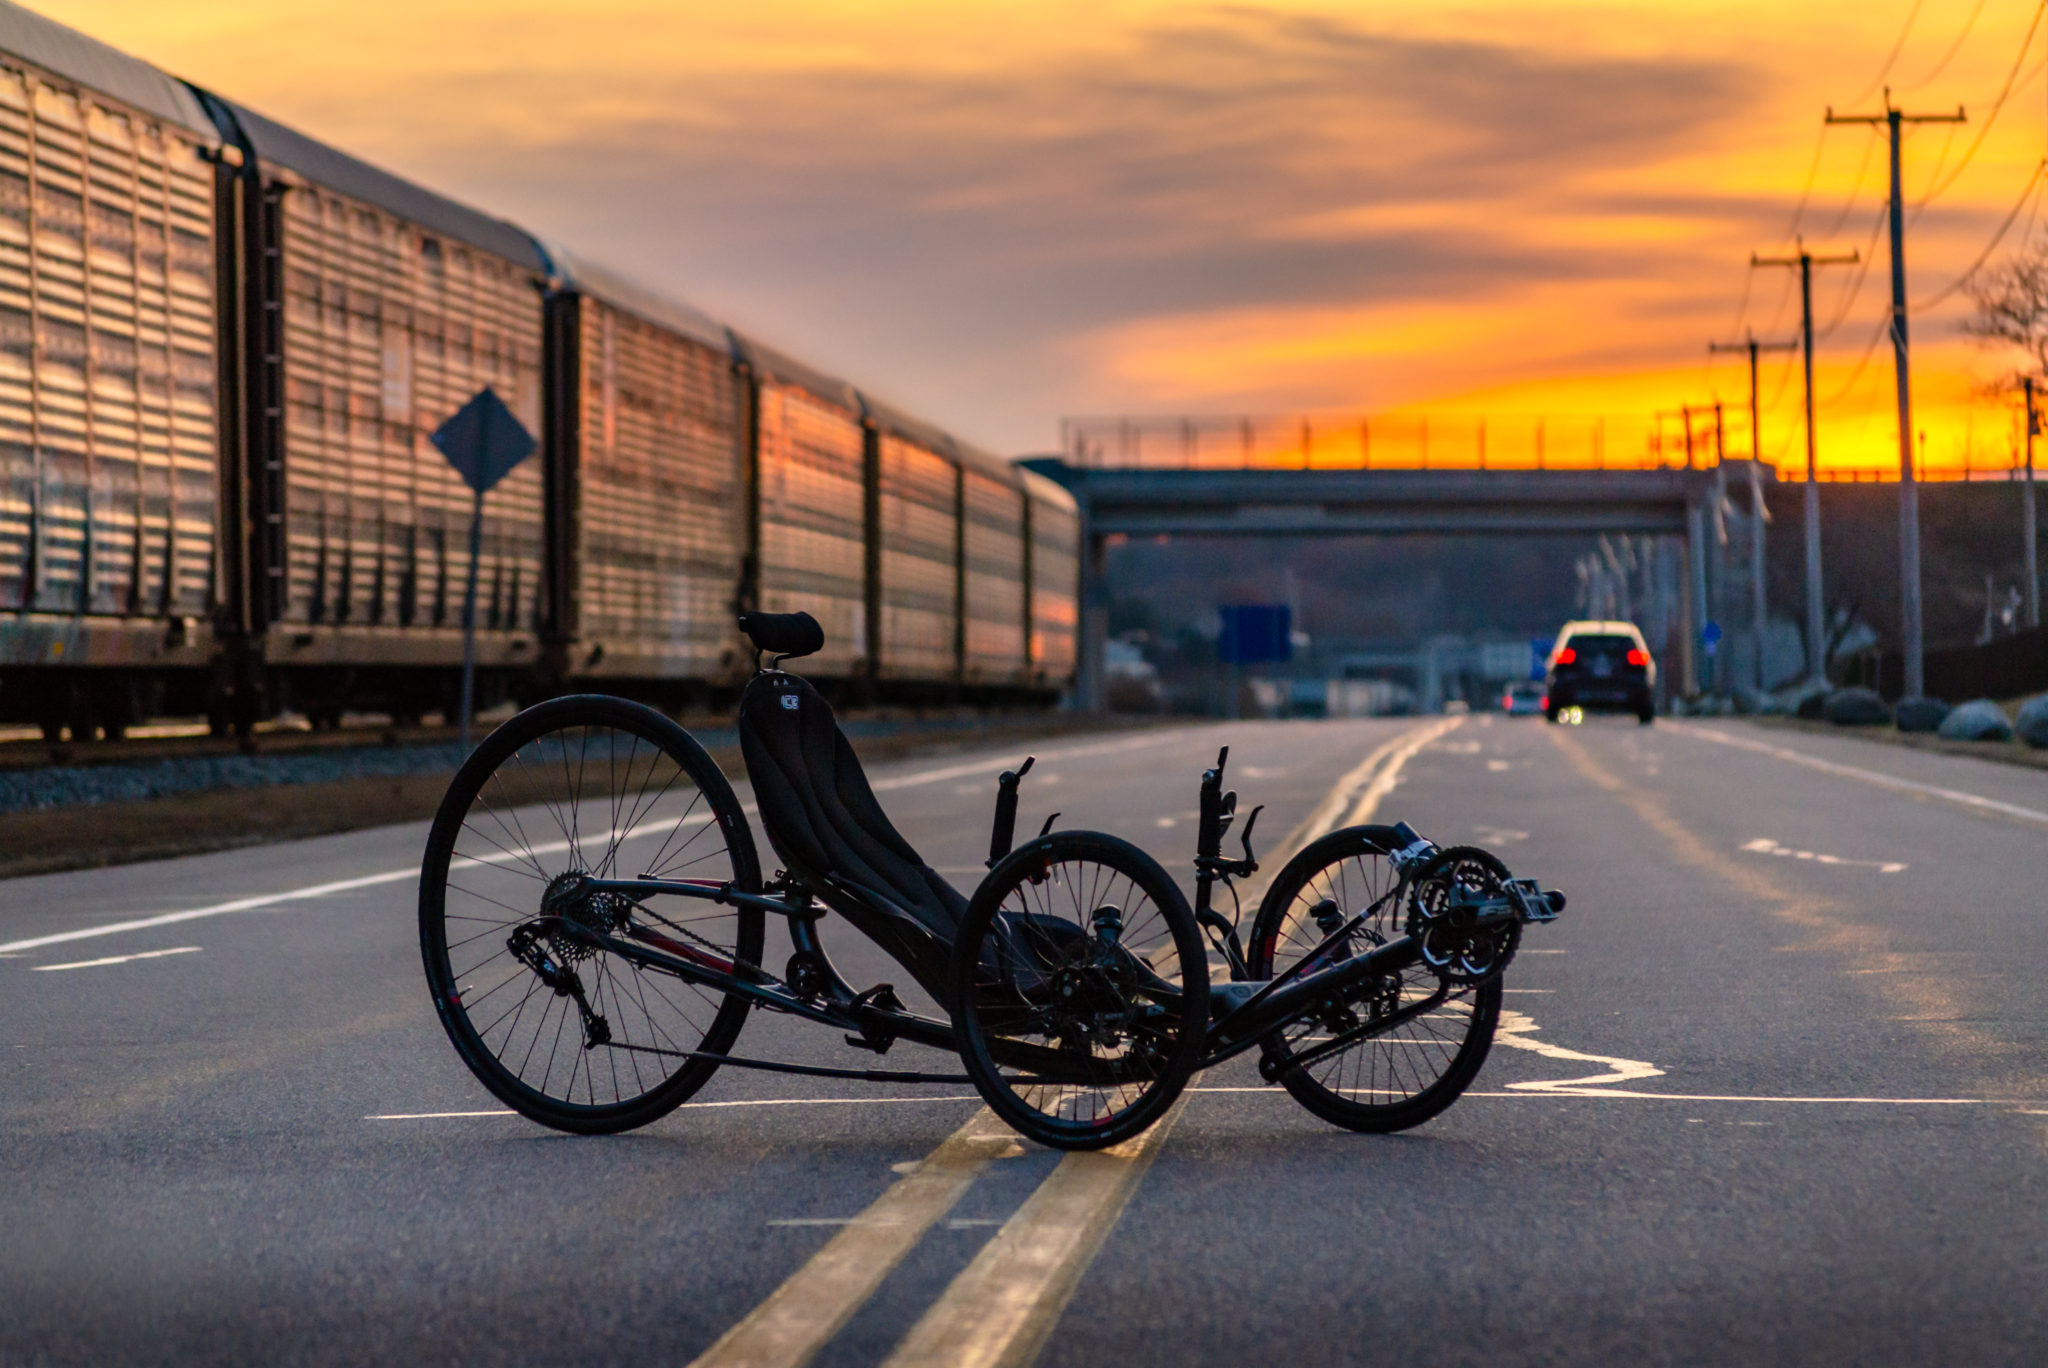 A black Ice Trike parked in the street at sunset